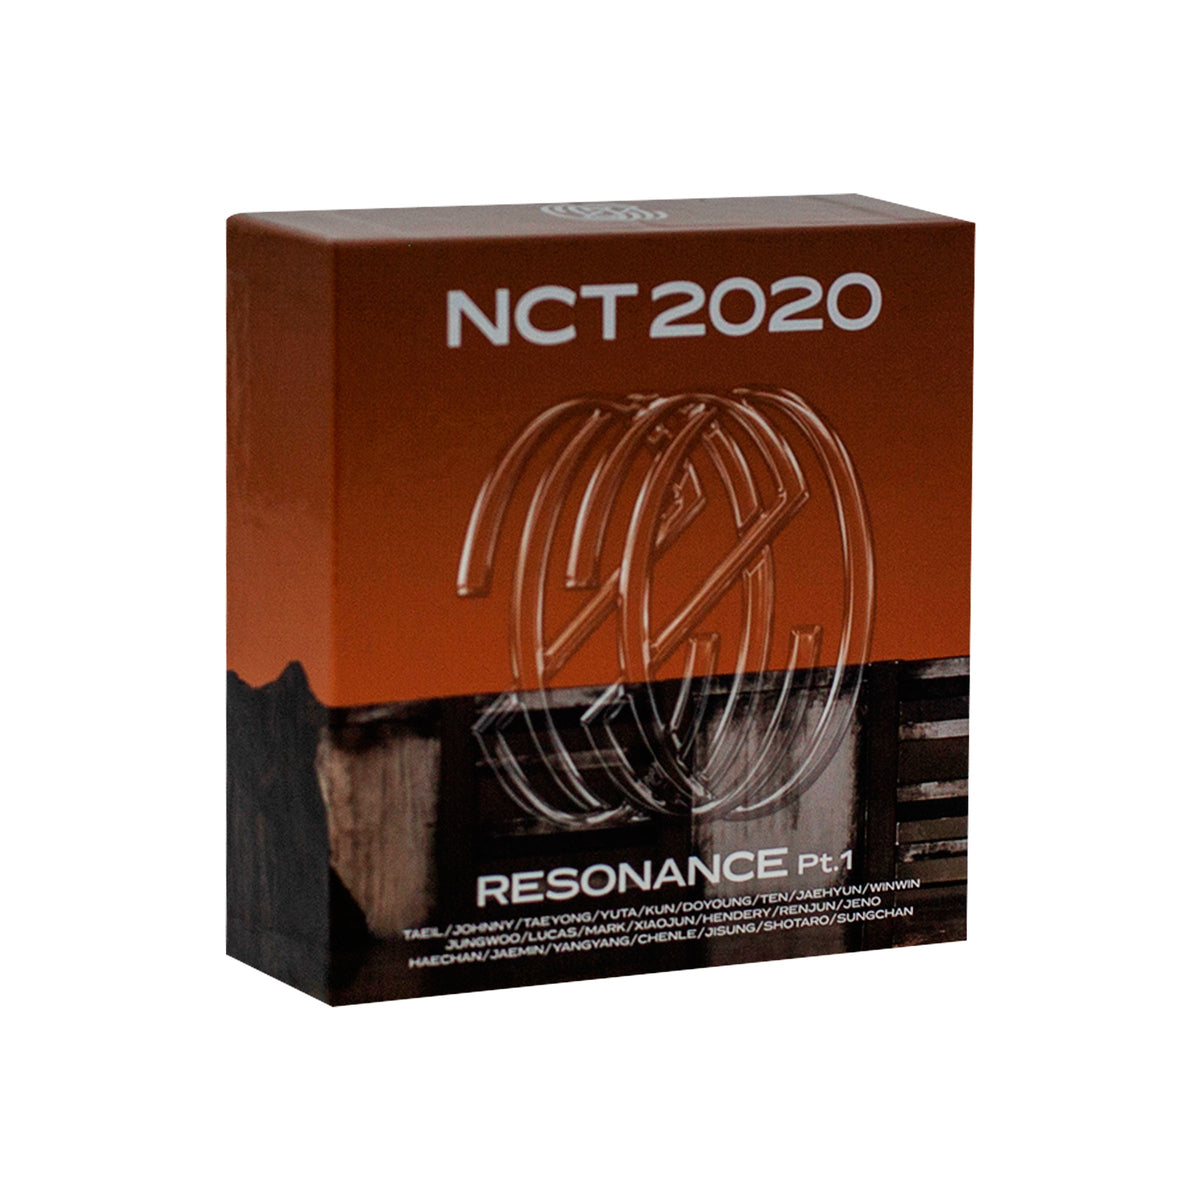 NCT NCT 2020 RESONANCE Pt1 2nd Album KiT Ver The Future Ver Main Product Image